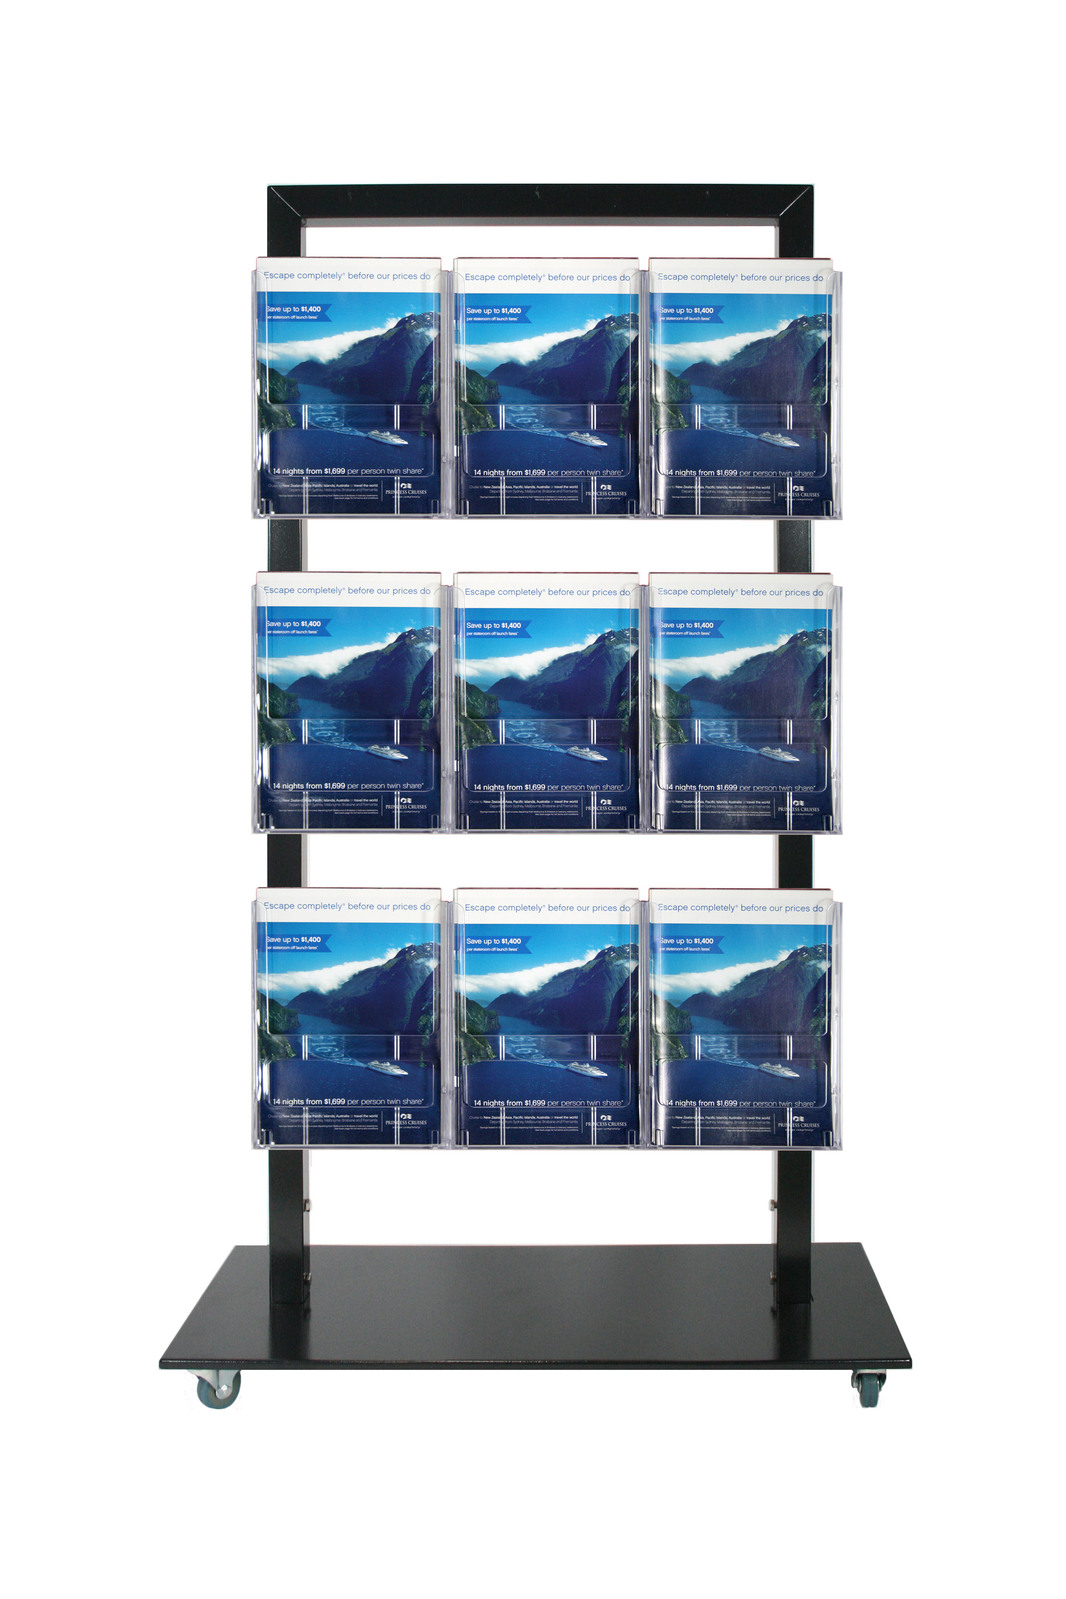 Black Mall Stand - 9 A4 Brochure Holders